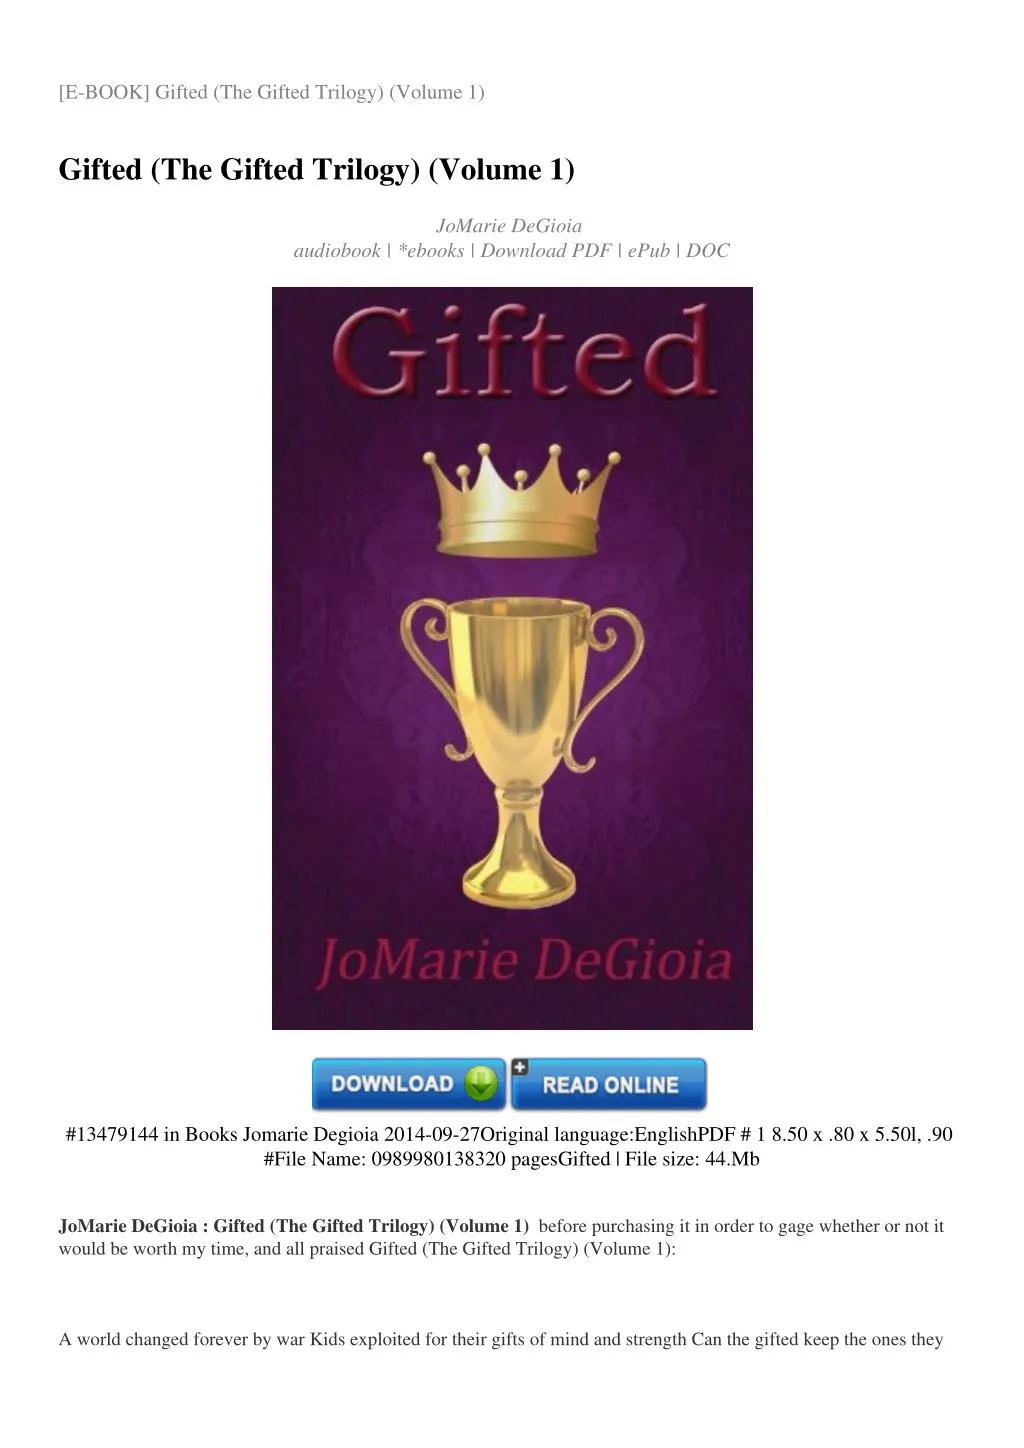 e book gifted the gifted trilogy volume 1